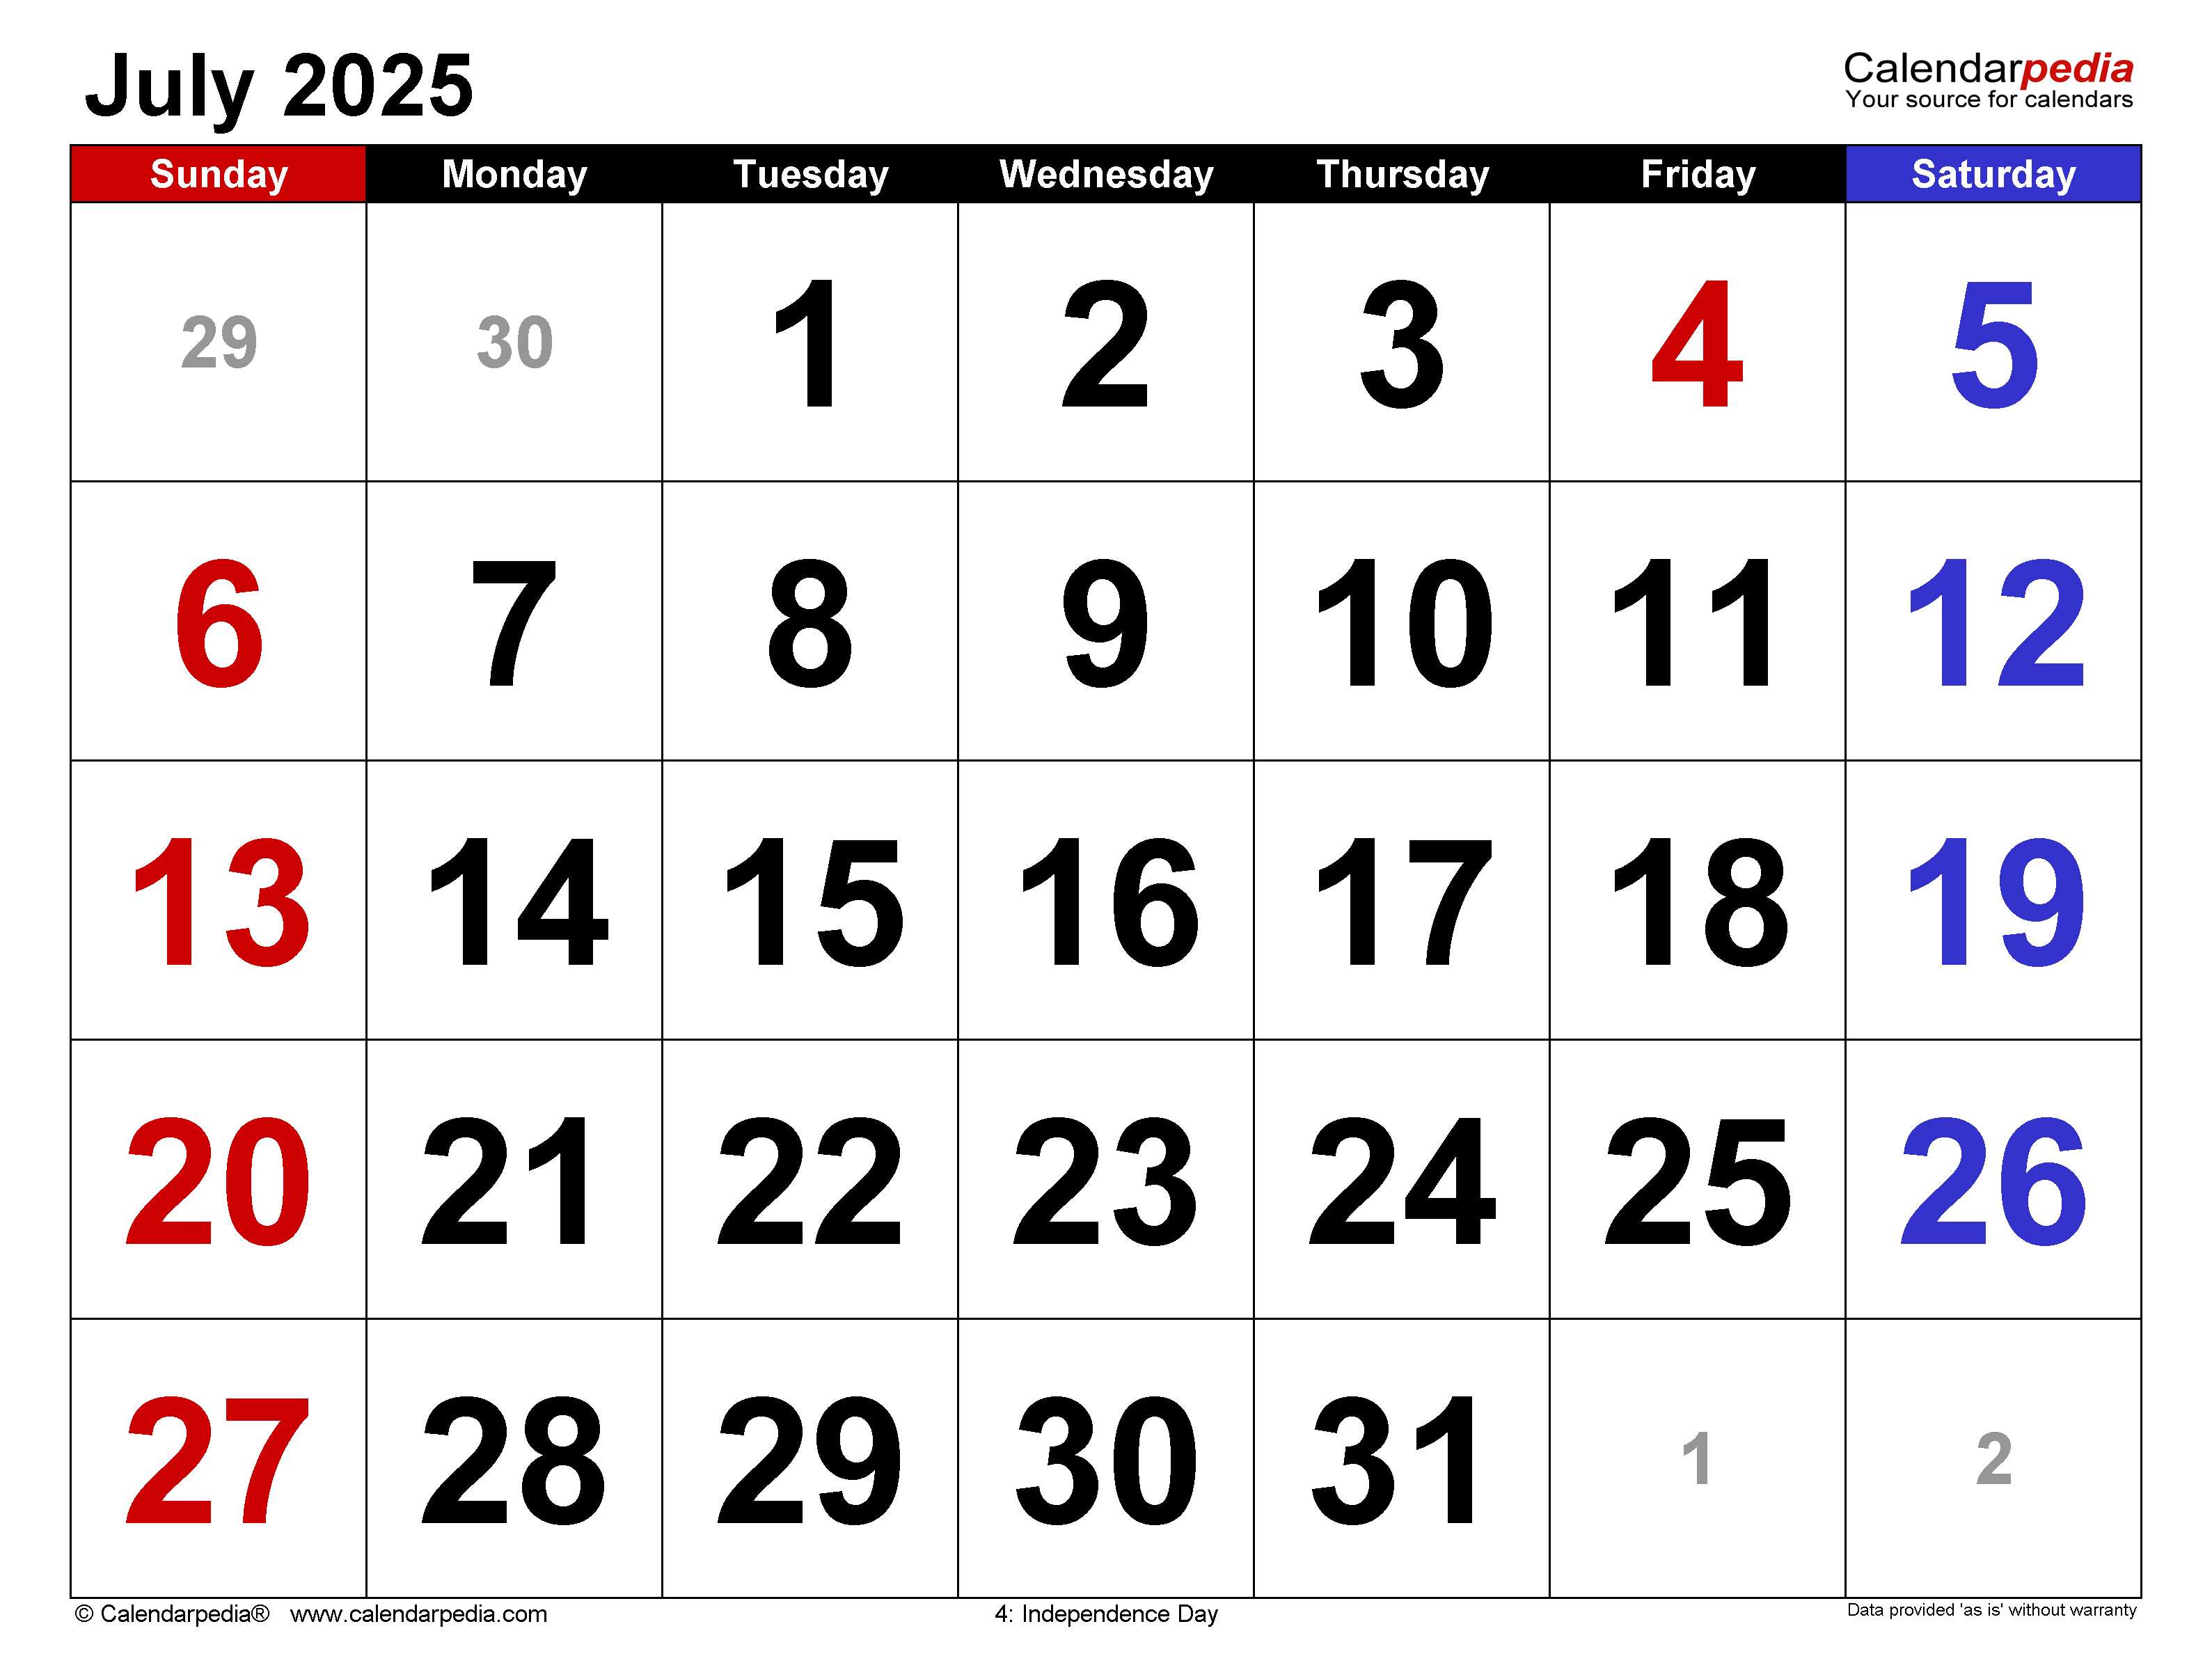 July 2025 Calendar | Templates For Word, Excel And Pdf intended for Calendar For July 2025